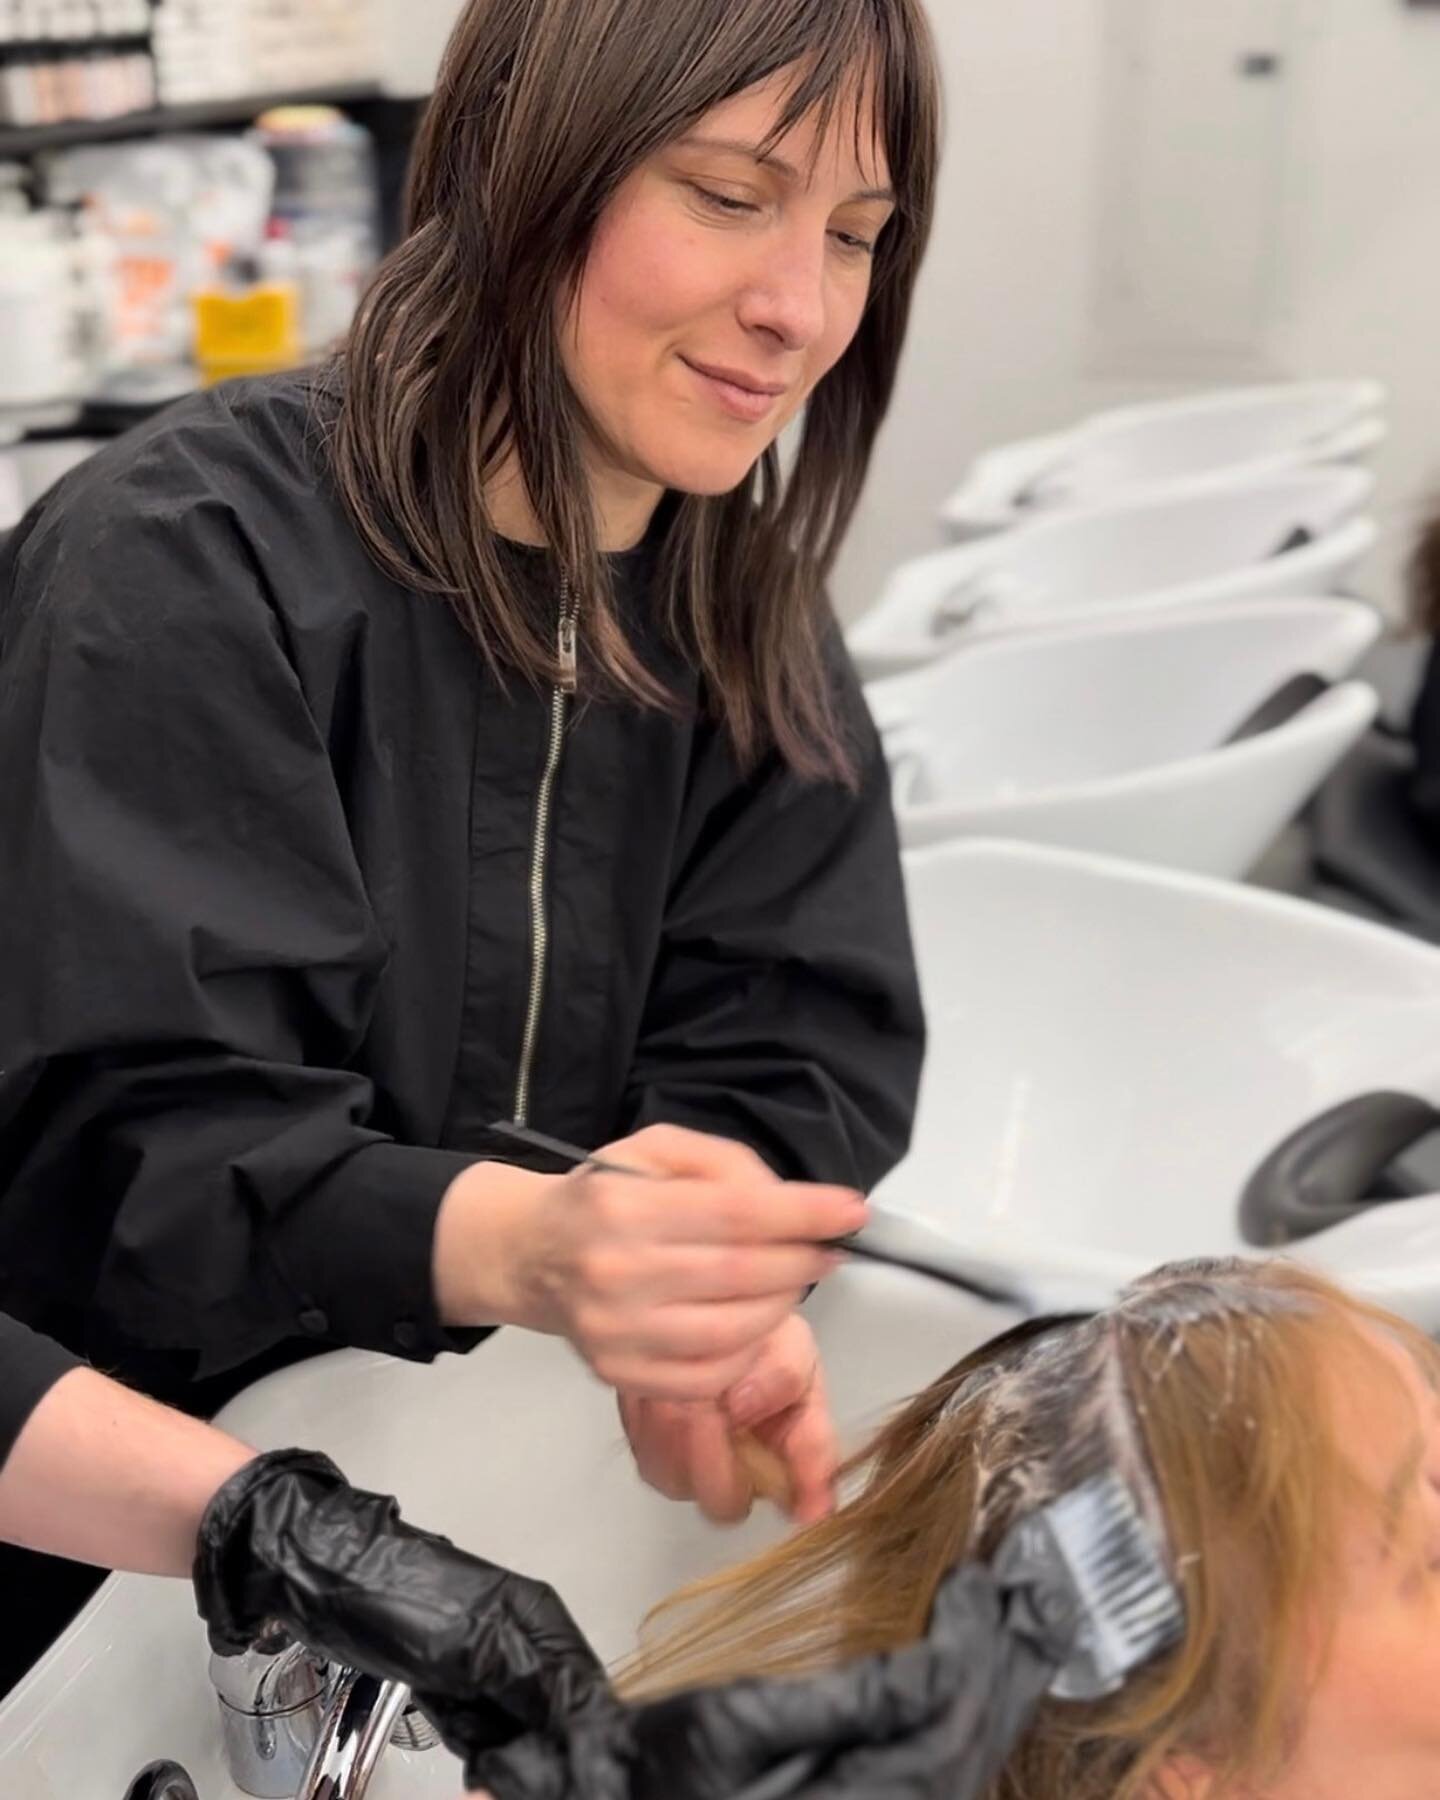 Are you ready to take your hairstyling career to new heights within a supportive team-based salon? Look no further because we're searching for talented individuals like you! Join our award-winning salon, where we cultivate personal and professional g